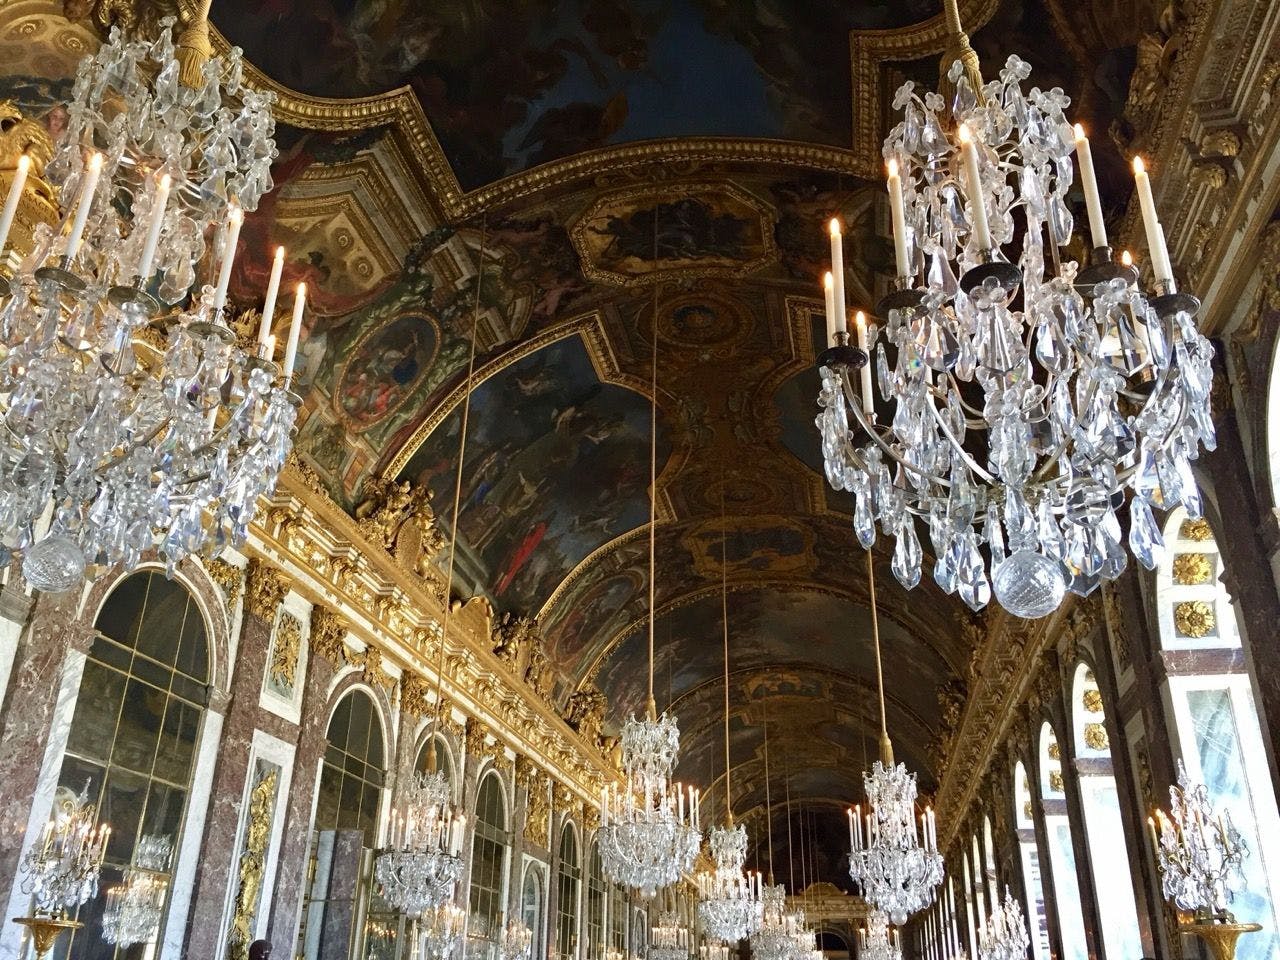 Inside the Palace of Versailles in France.